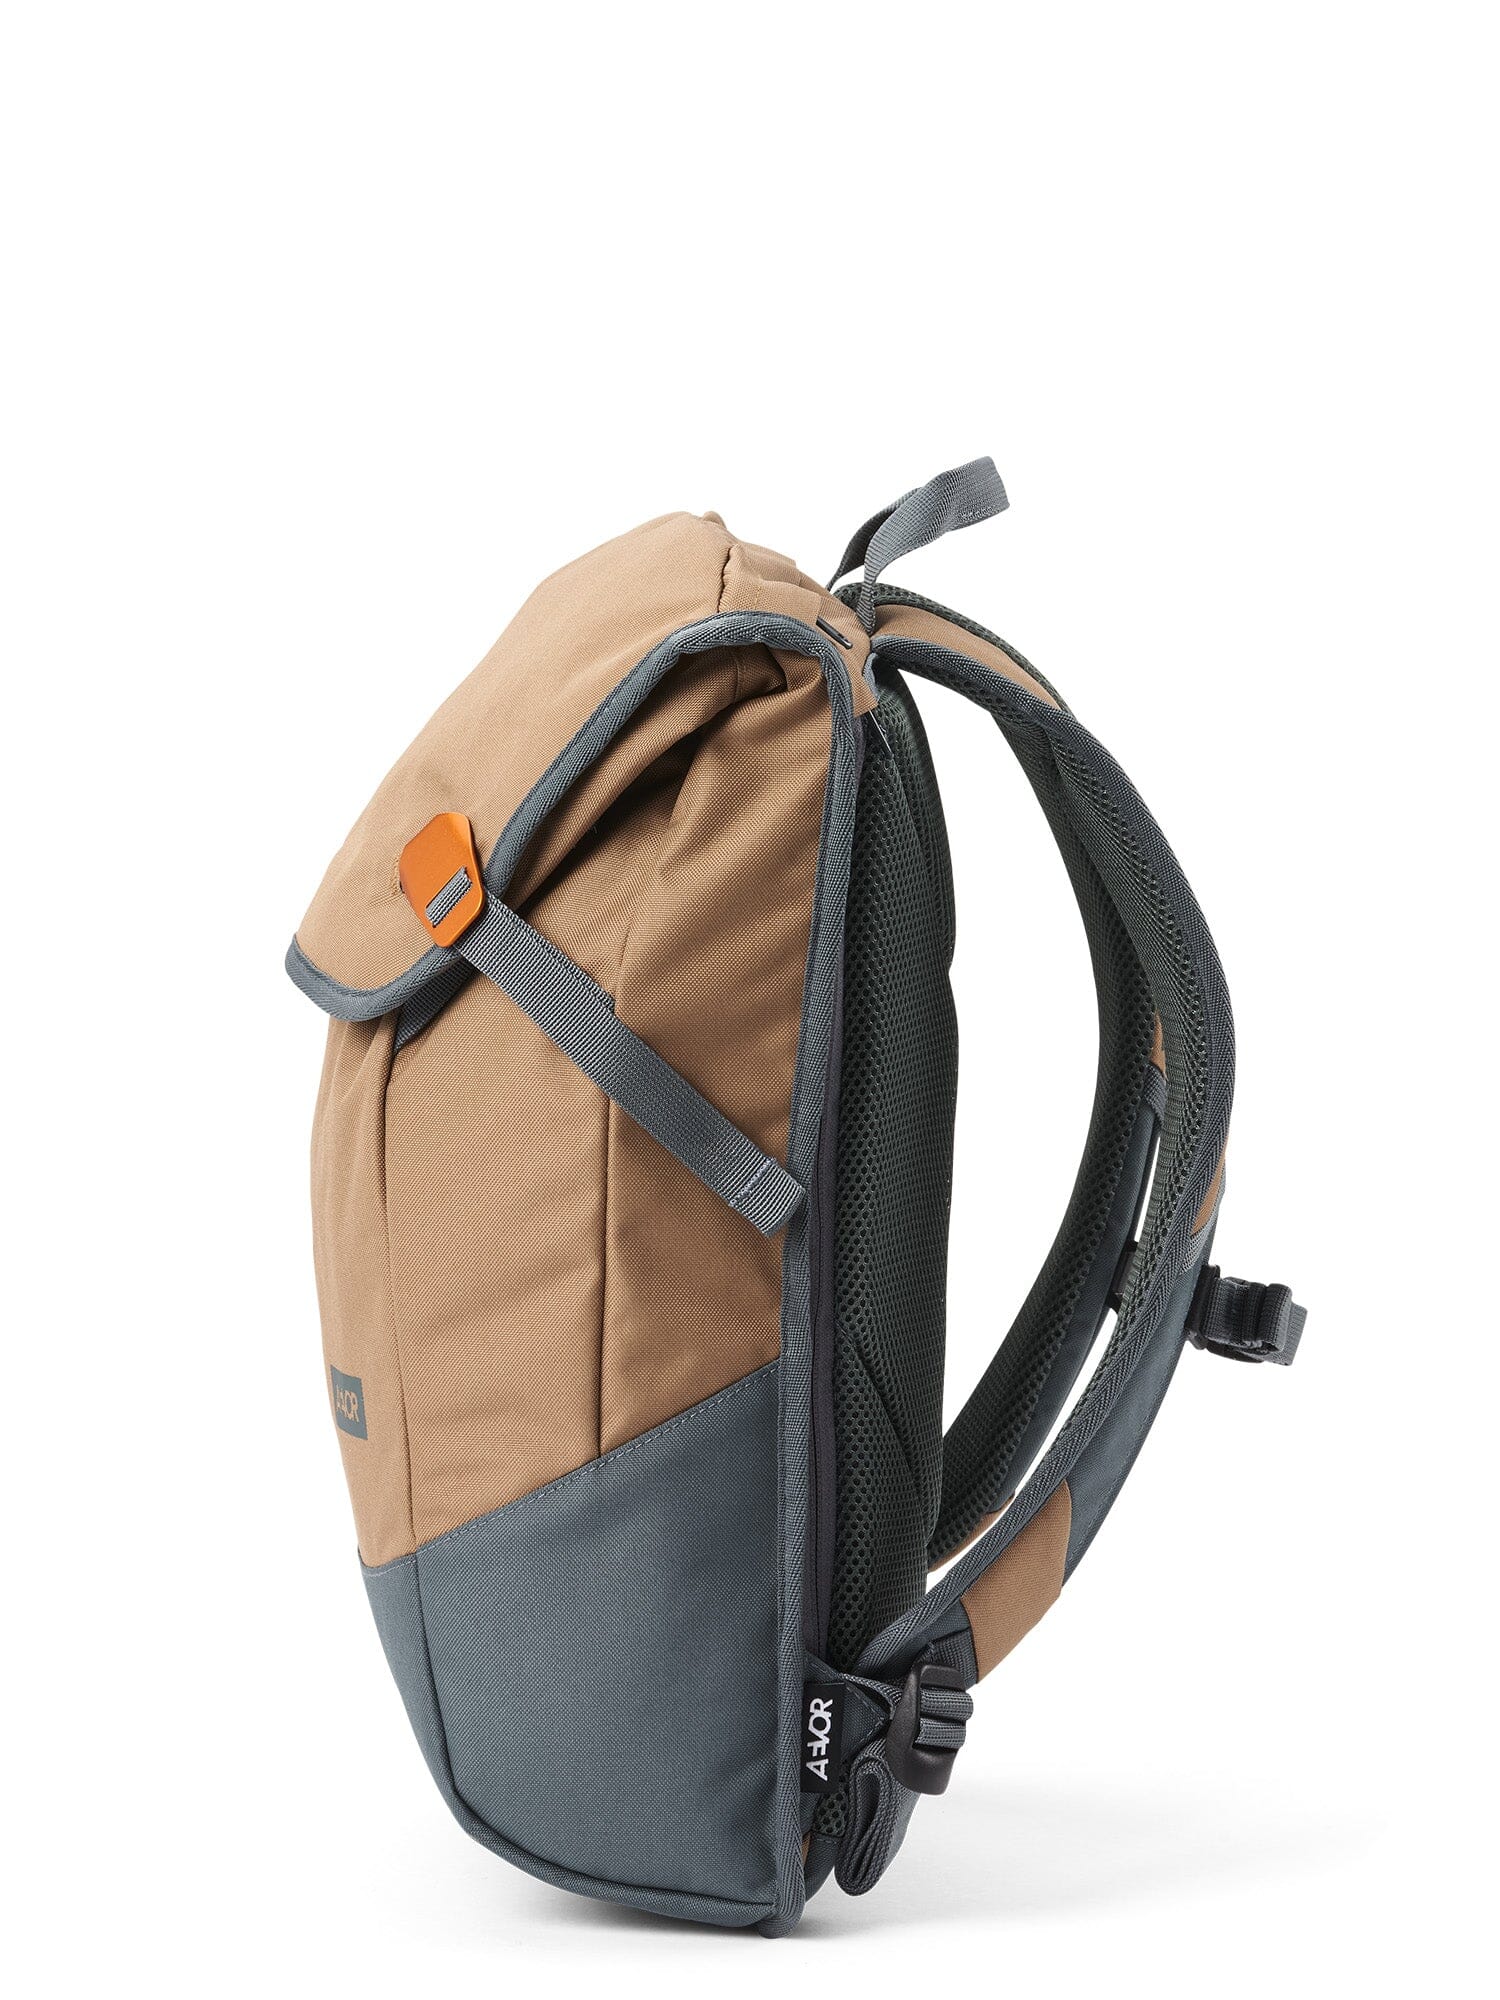 Aevor Daypack Backpack - Made from Recycled PET-bottles California Hike Bags